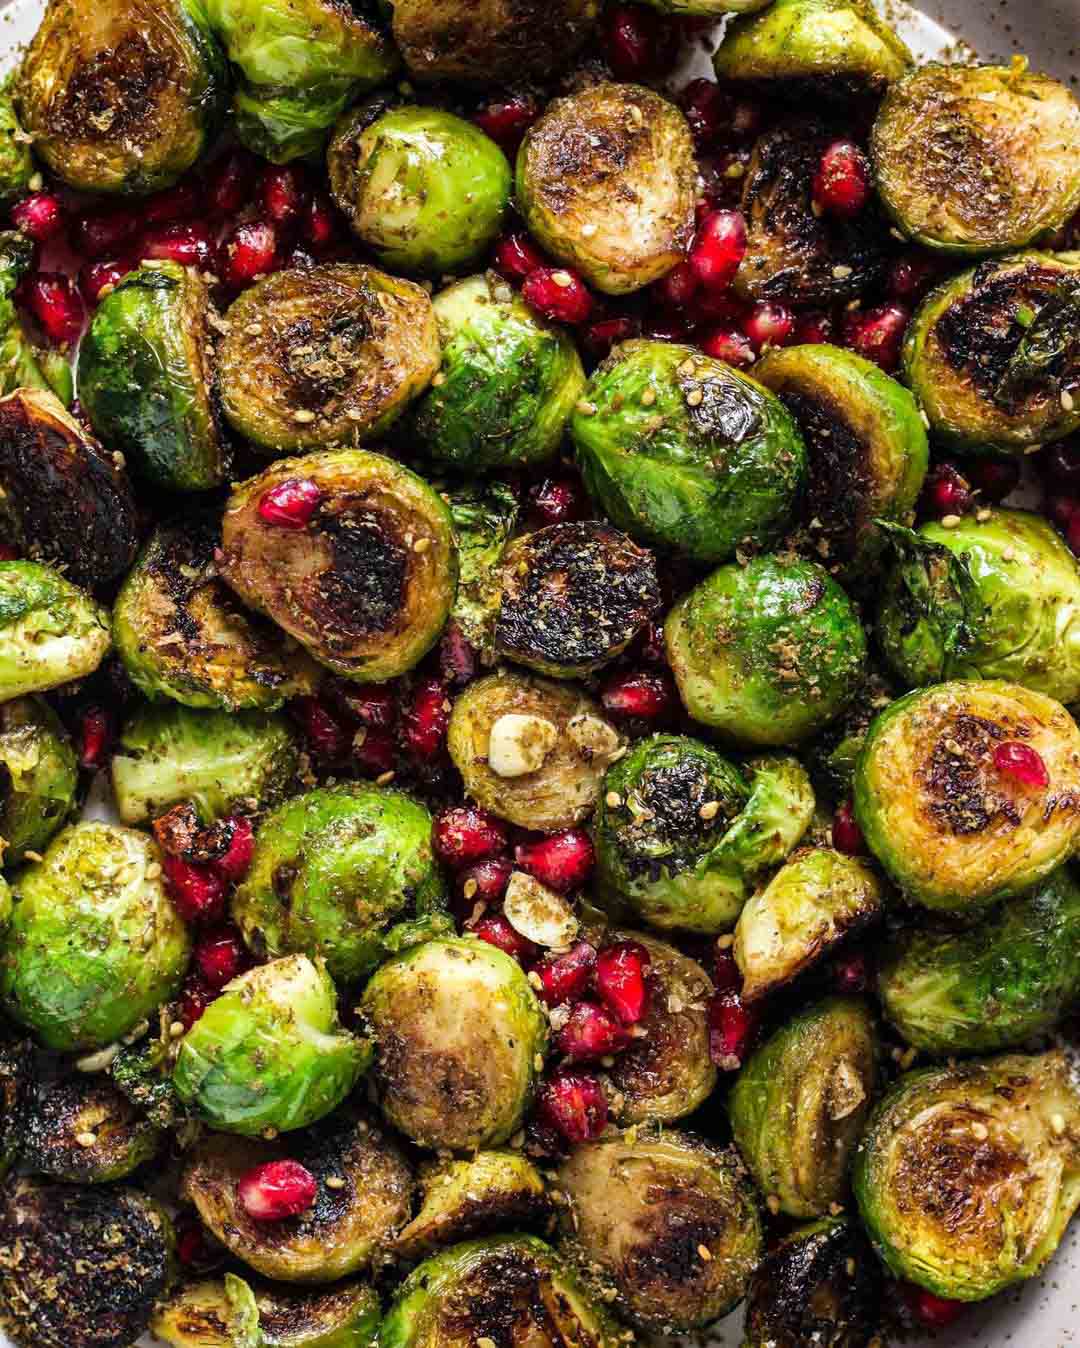 Charred Brussels Sprouts with Za'atar & Date Syrup recipe served.